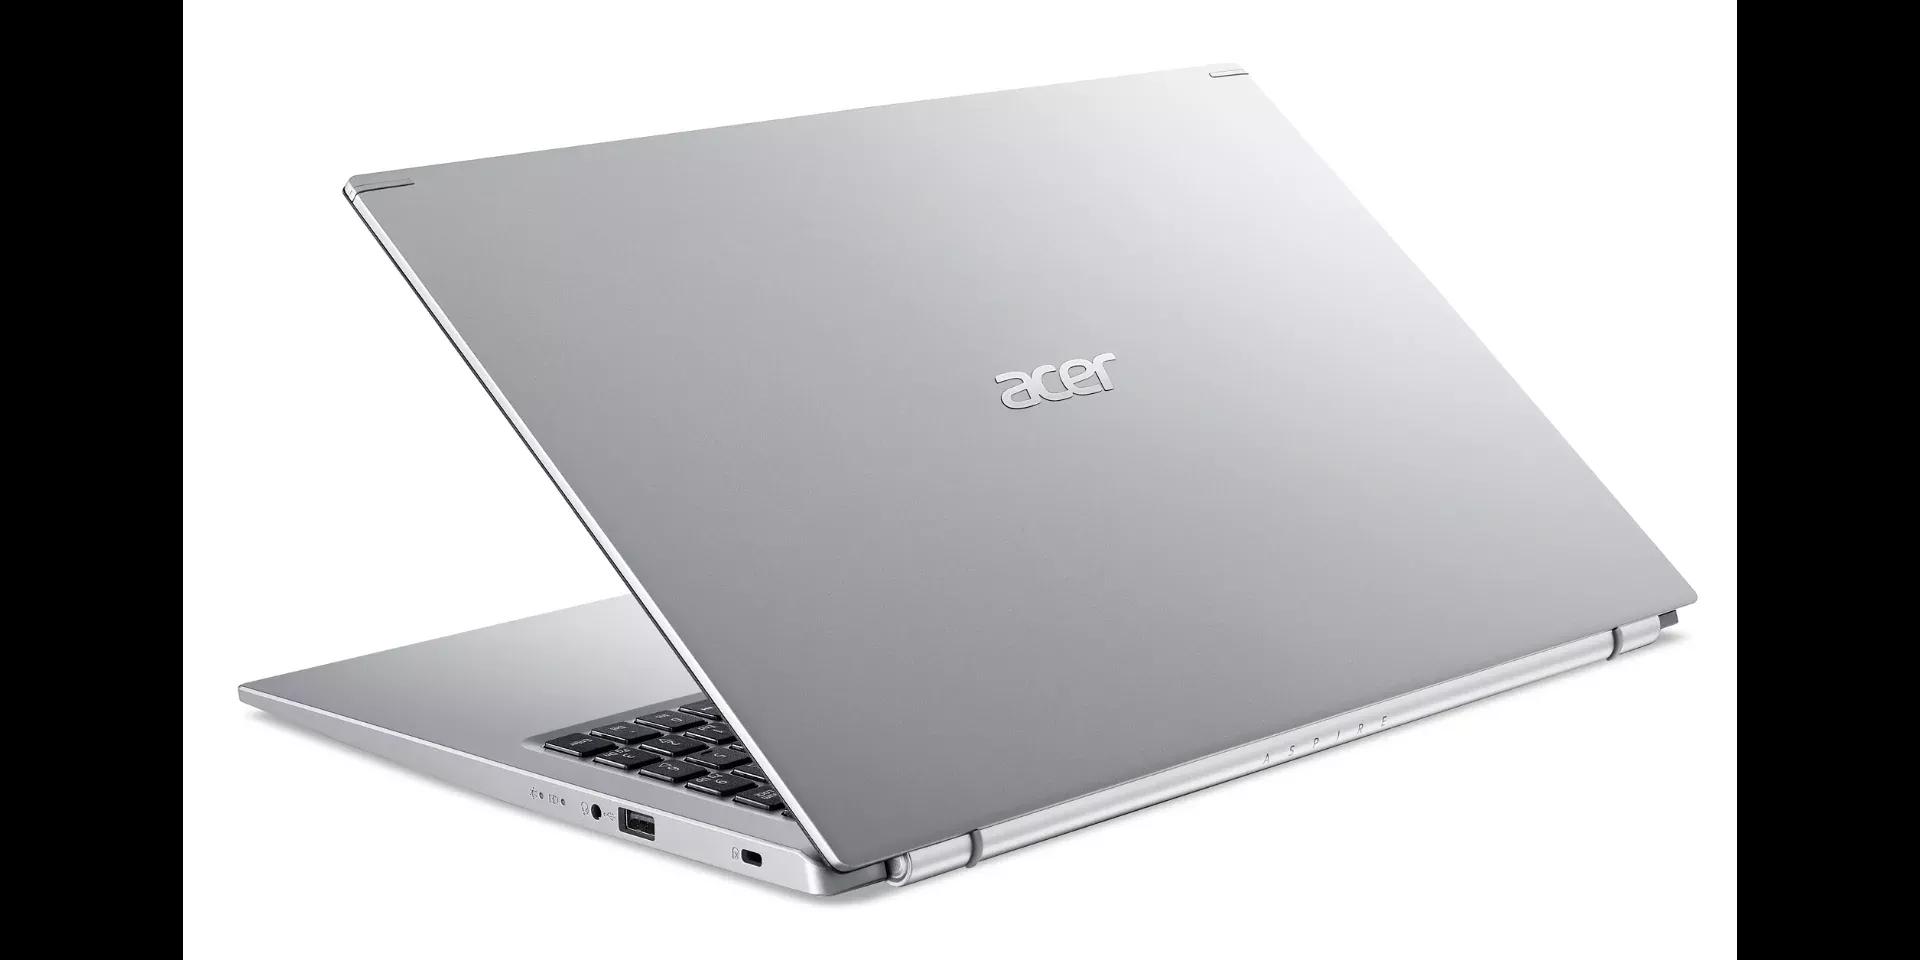 Acer extensa Price in Nepal